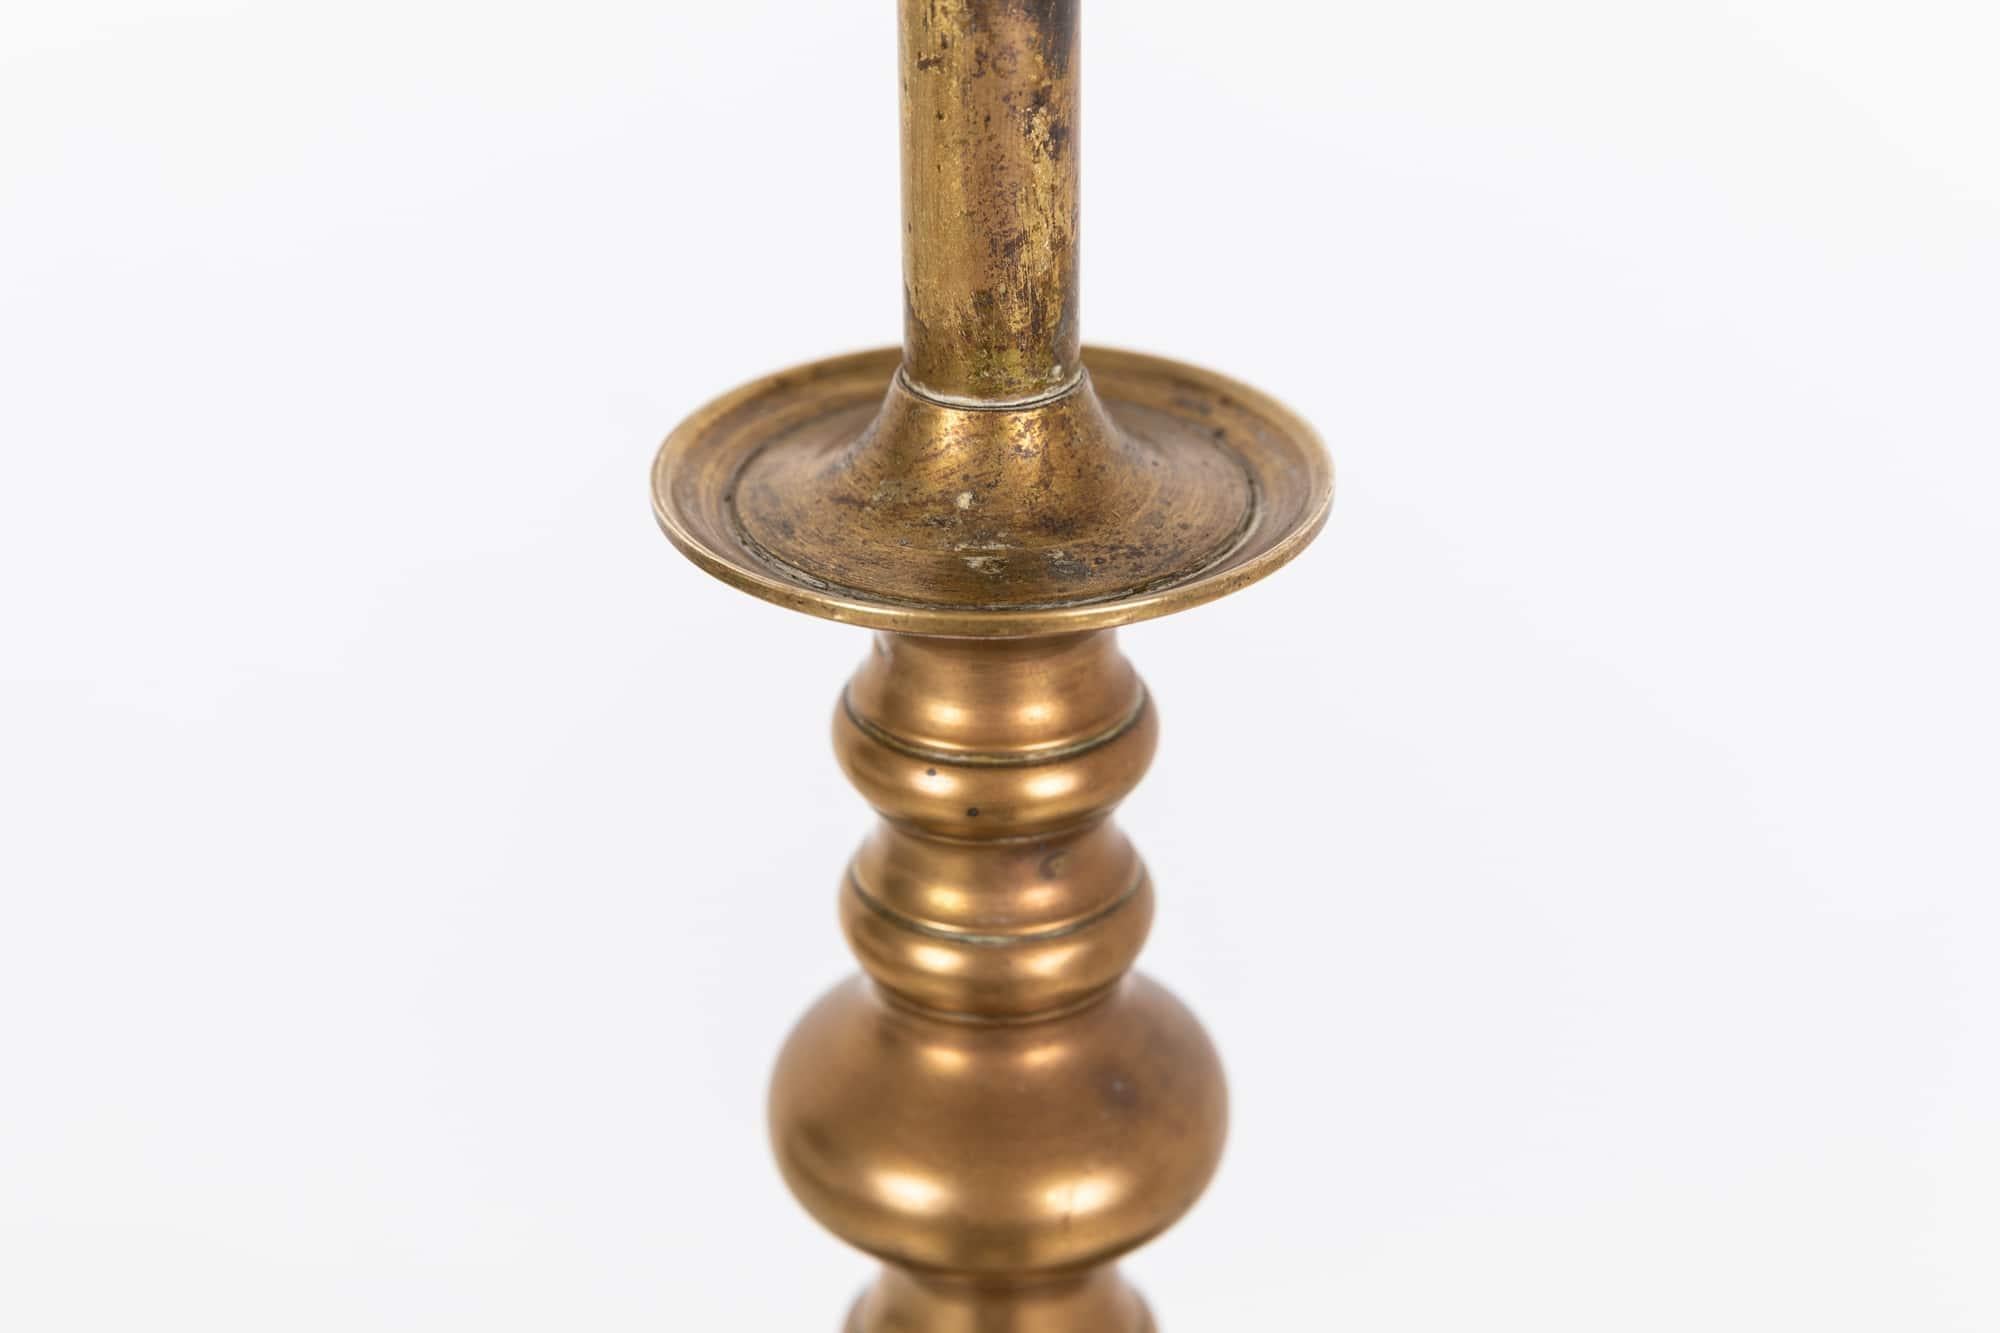 Large Antique Vintage Industrial Brass Turned Column Desk Table Lamp, circa 1900 In Fair Condition For Sale In London, GB